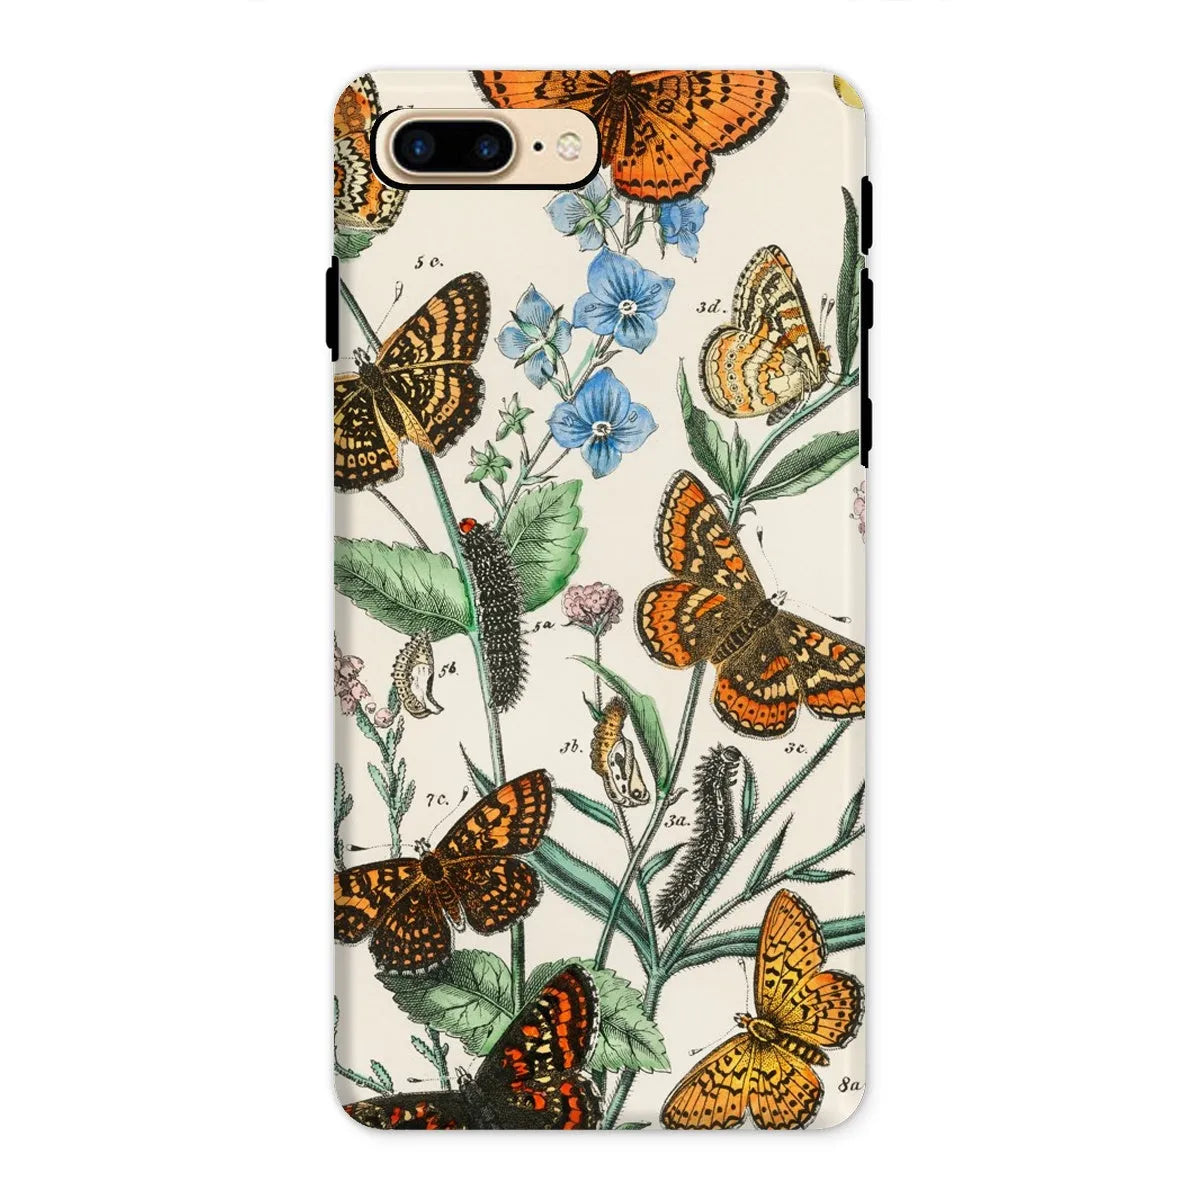 This Butterfly Aesthetic Art Phone Case - William Forsell Kirby - Iphone 8 Plus / Matte - Mobile Phone Cases